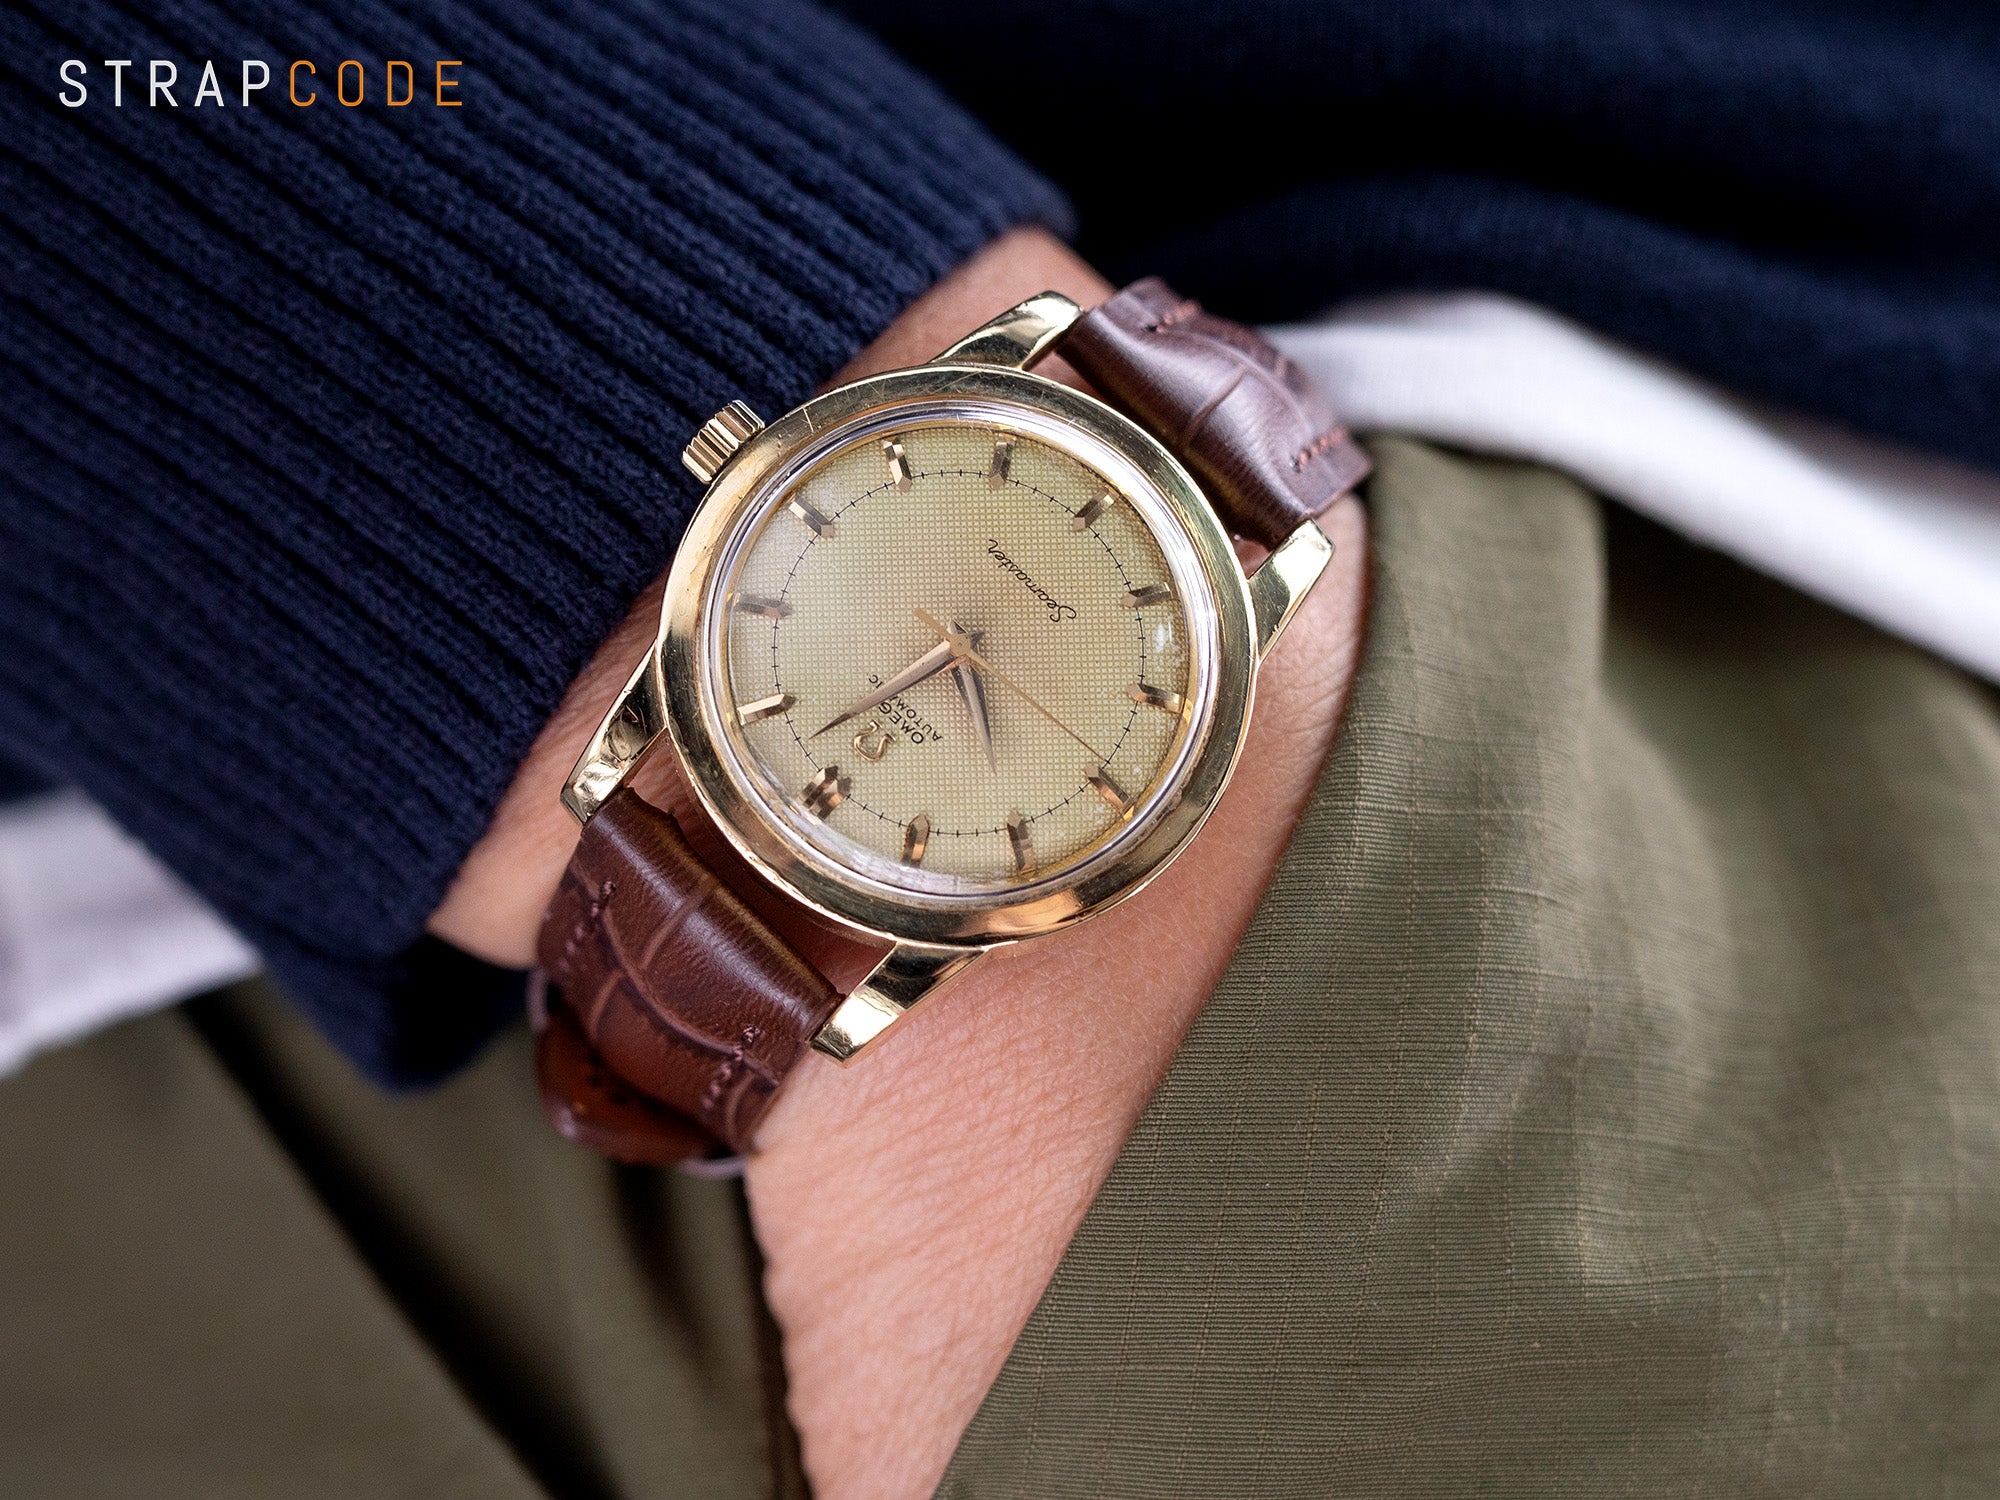 1952 Omega Gold Capped Seamaster with Bumper Caliber 354 Brown Crocodile Grain watch bands by Strapcode